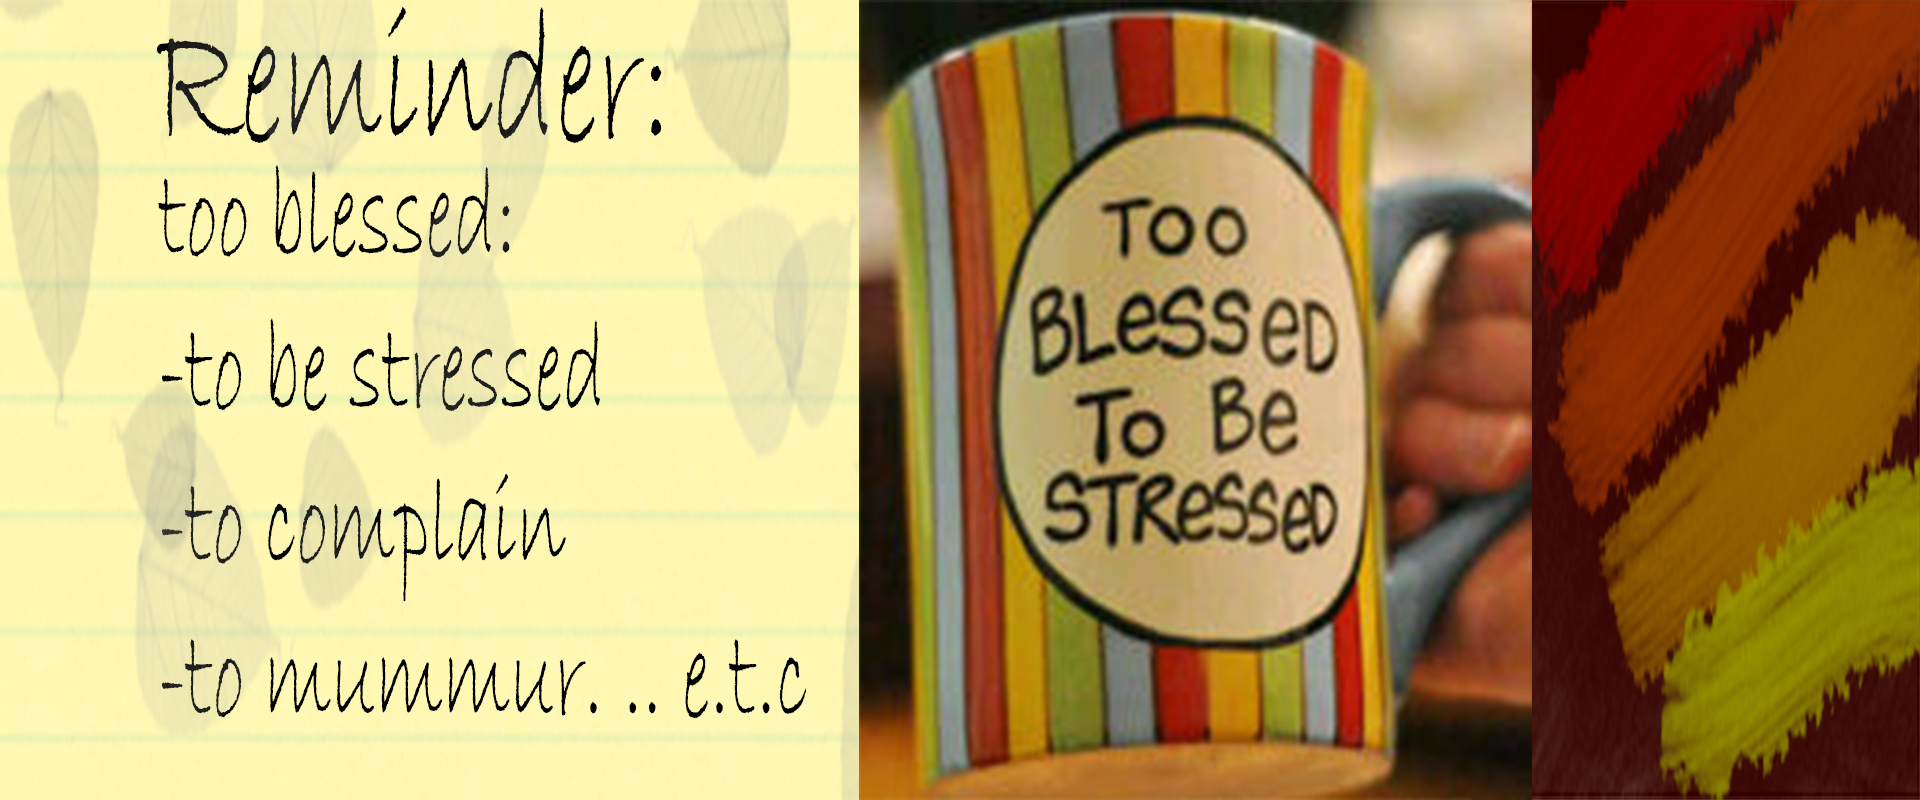 Too Blessed to be stressed